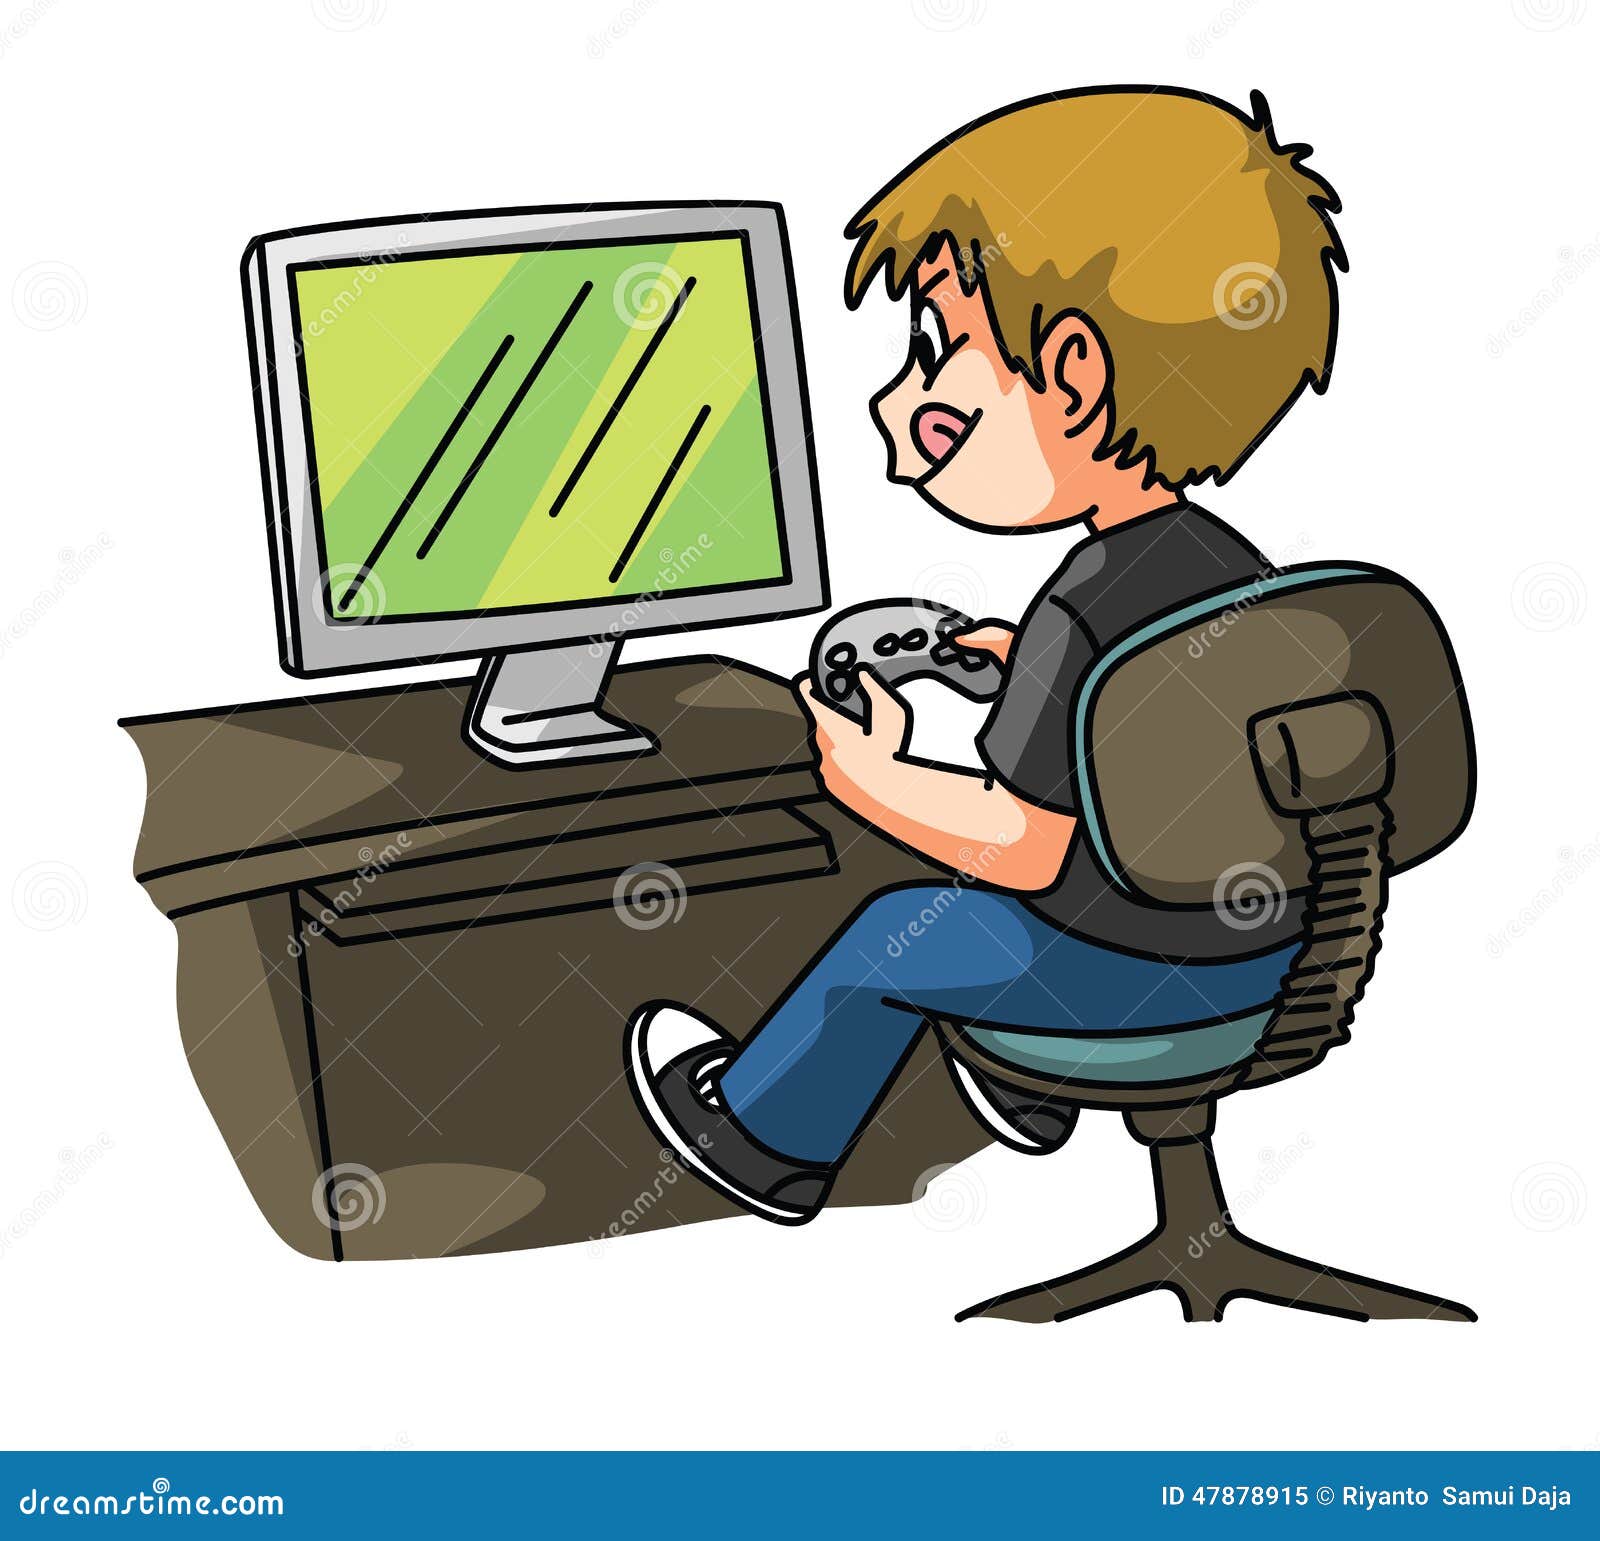 Drawing examples of playing computer games portrayed by boys